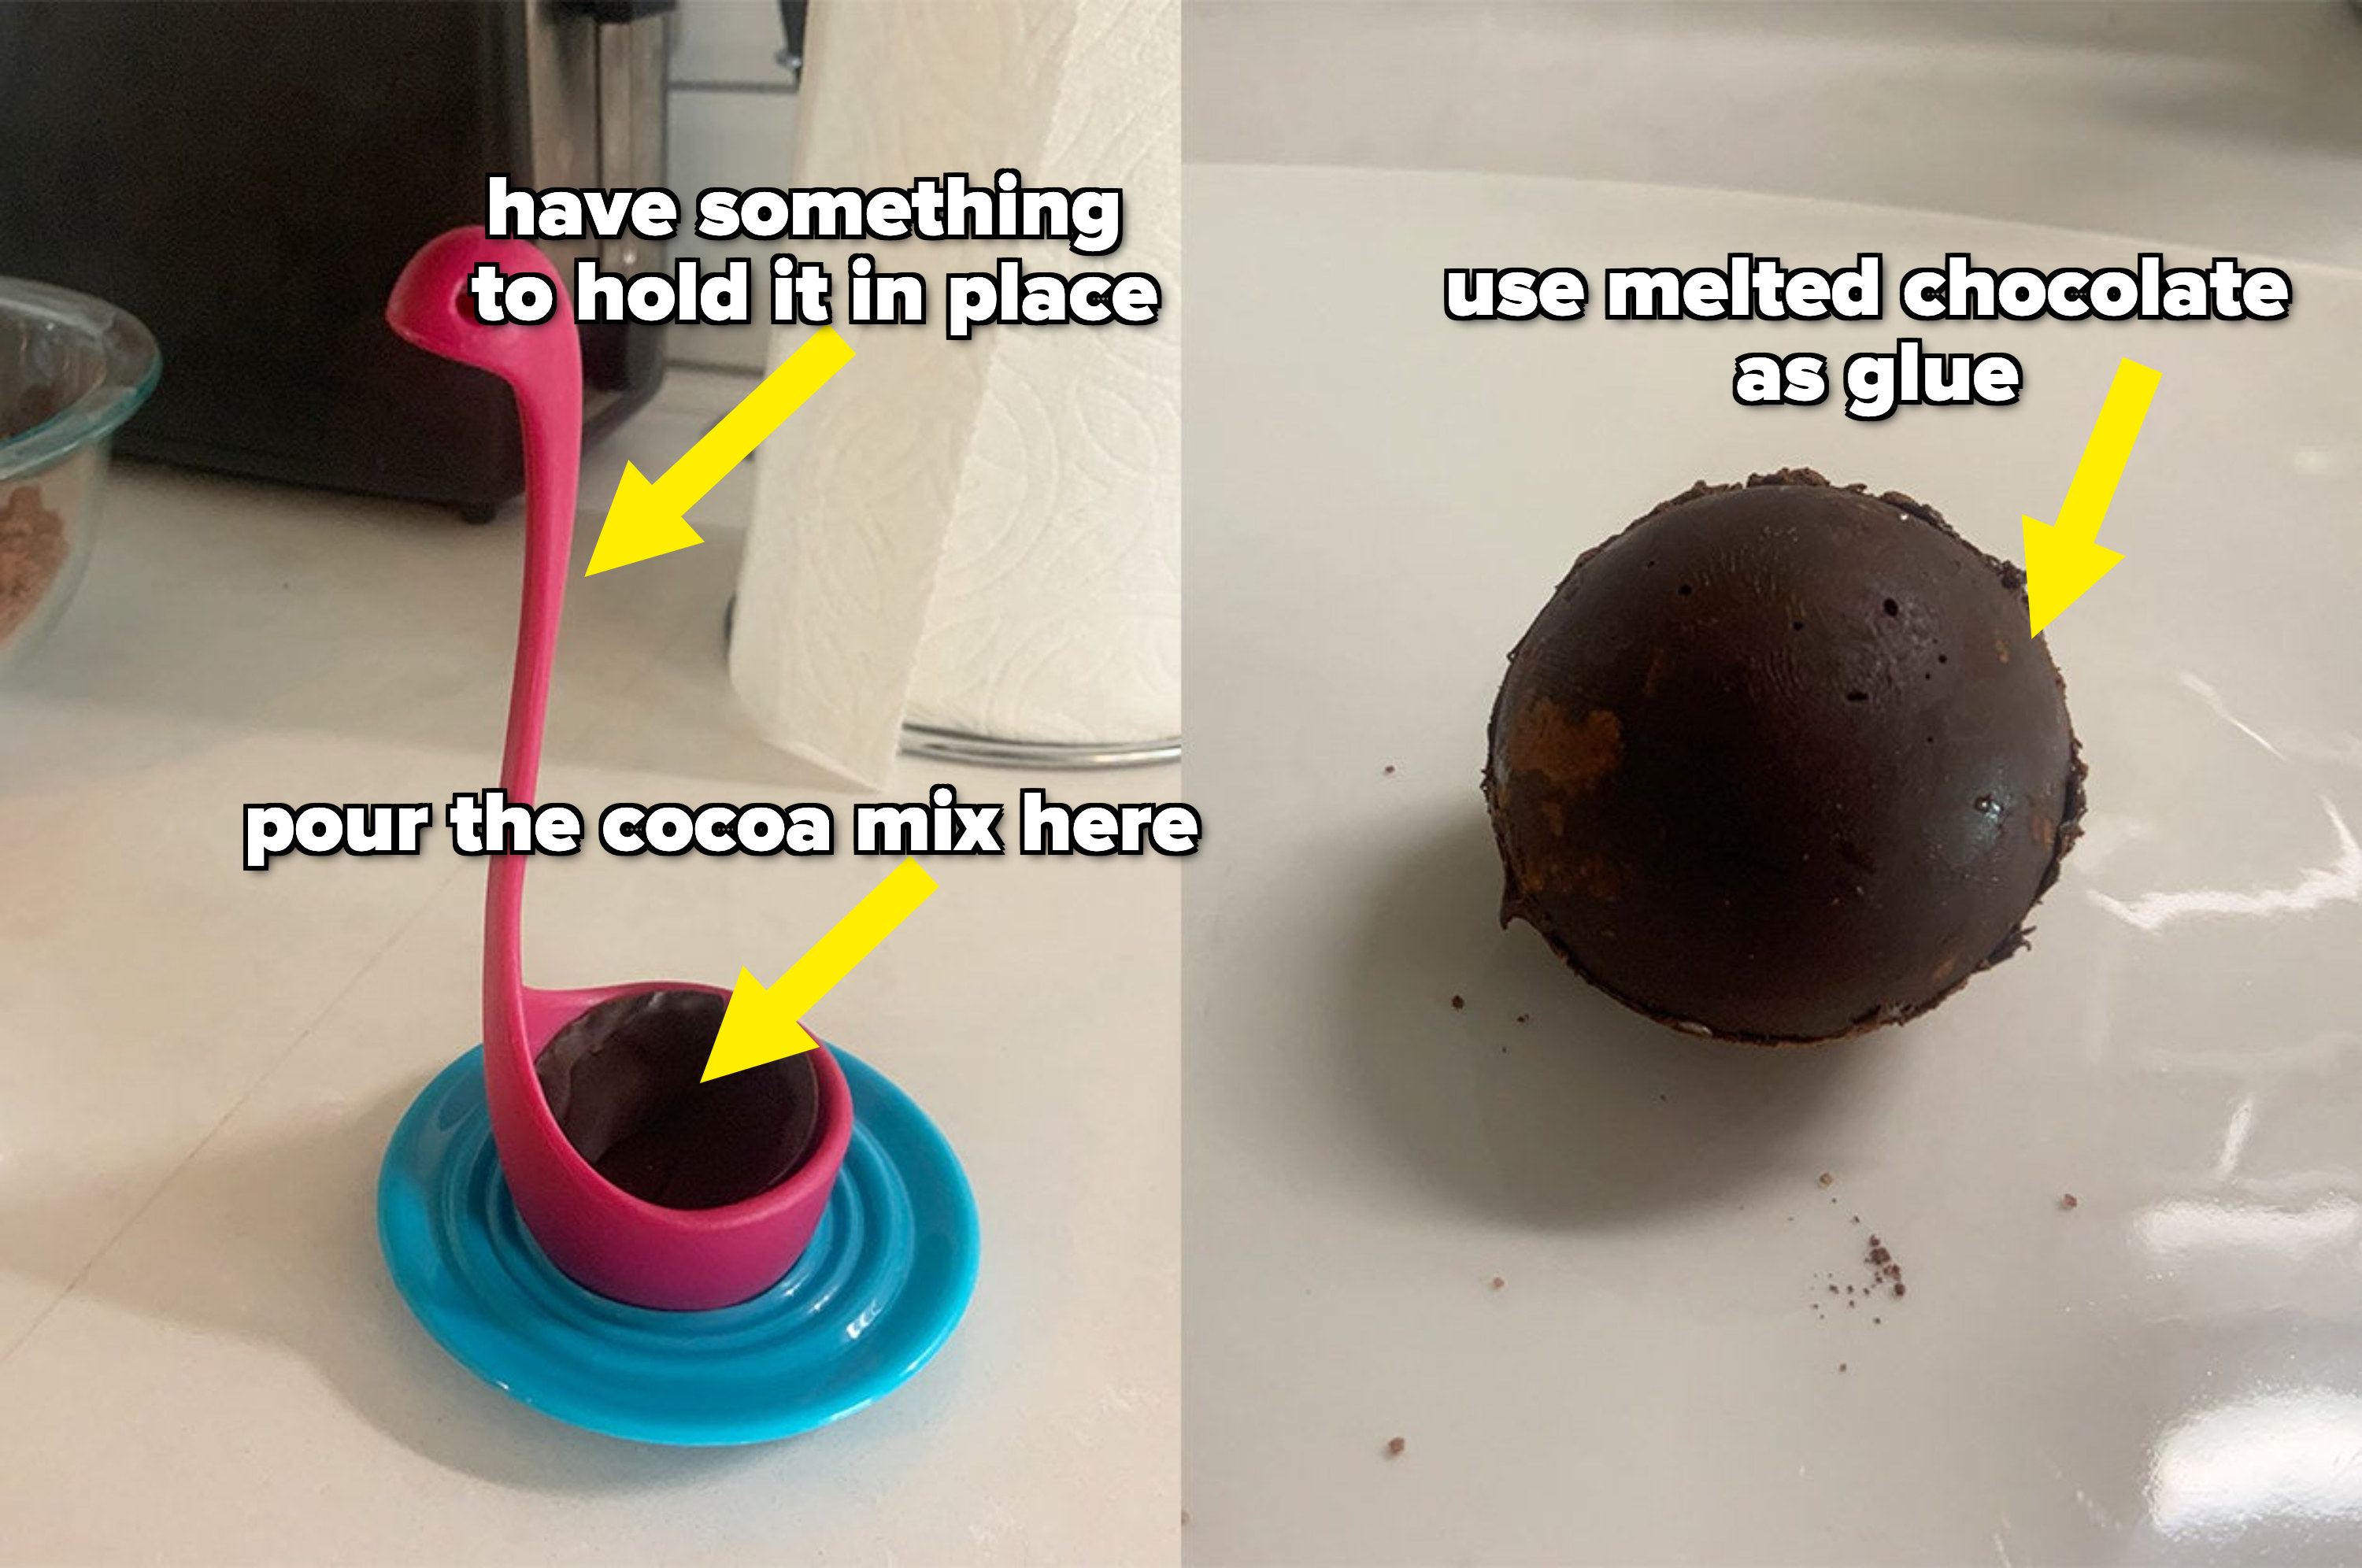 the bottom shell is in a lochness monster-shaped cup, and the top is secured with melted chocolate